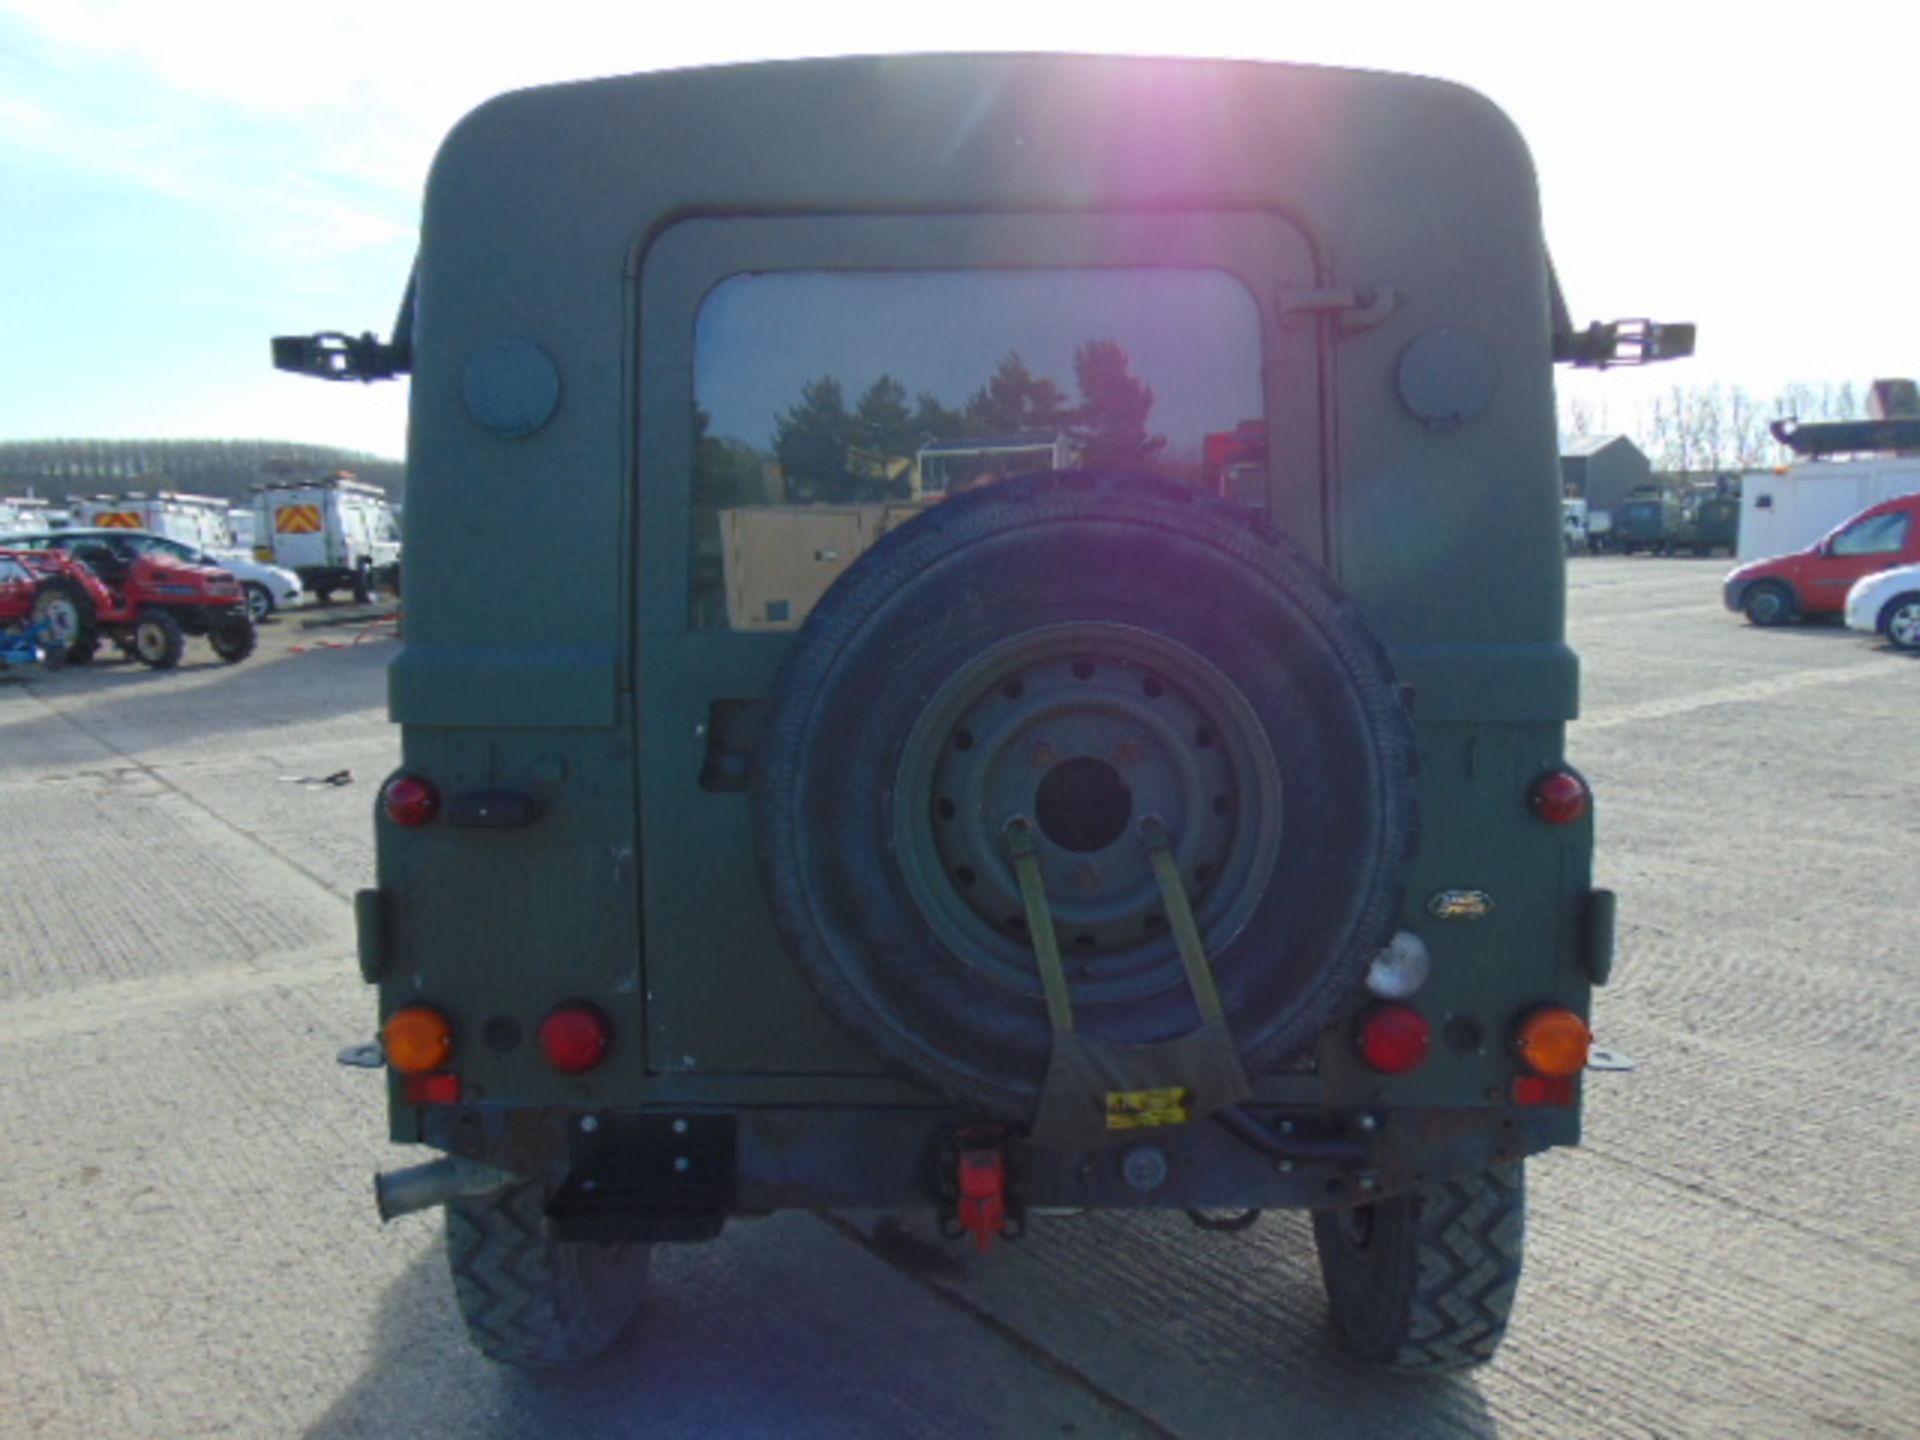 Military Specification Land Rover Wolf 90 Hard Top FFR - Image 7 of 19